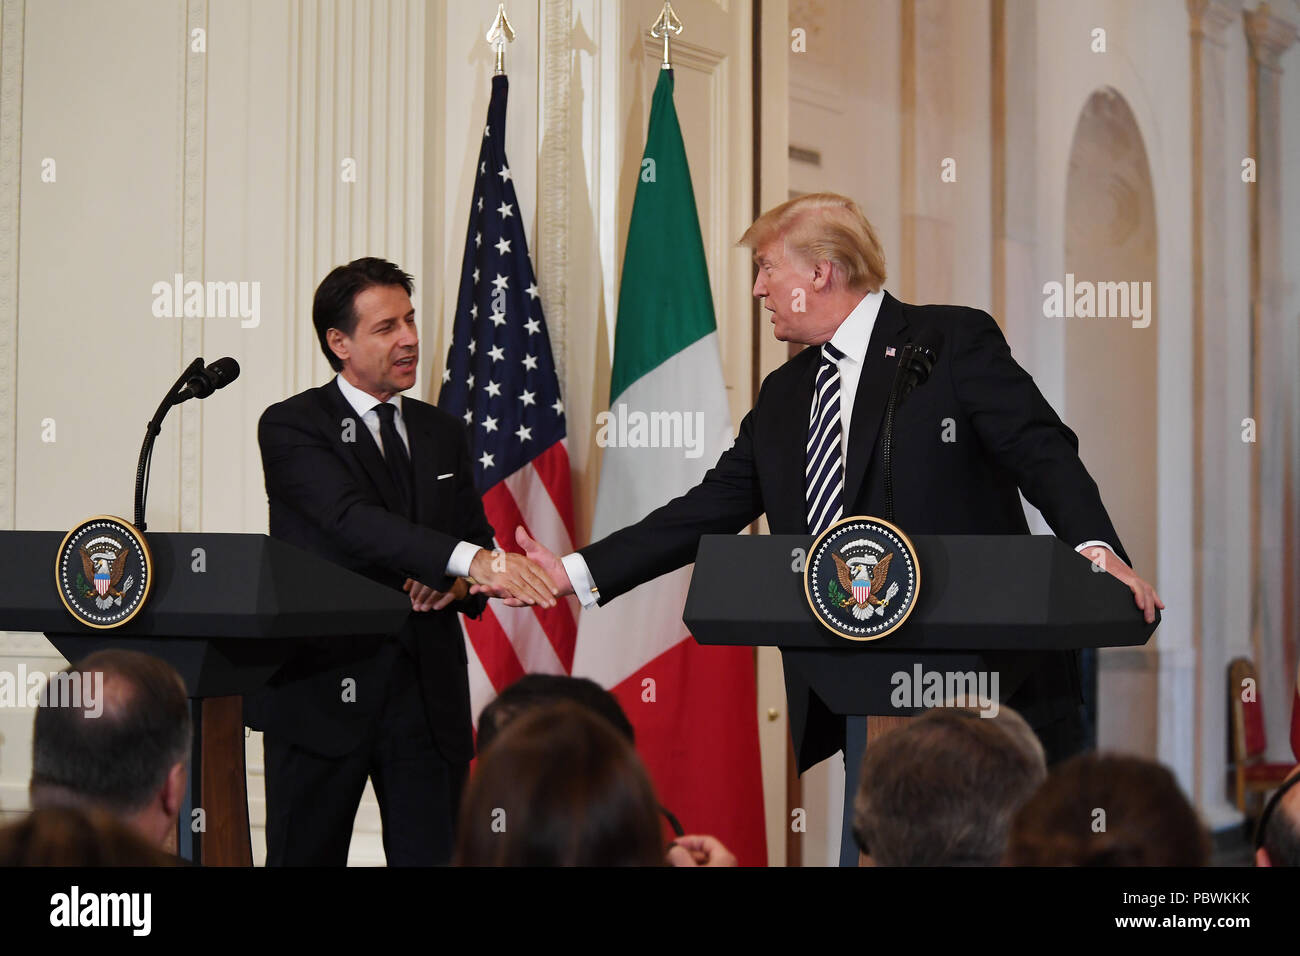 Washington, District of Columbia, USA. 30th July, 2018. 7/30/18- .The White House- Washington DC.President Donald Trump welcomes Giuseppe Conte, Prime Minister of Italy to the White House. The two leaders had a joint press conference fielding two questions each. photos by: - ImageCatcher News Credit: Christy Bowe/Globe Photos/ZUMA Wire/Alamy Live News Stock Photo